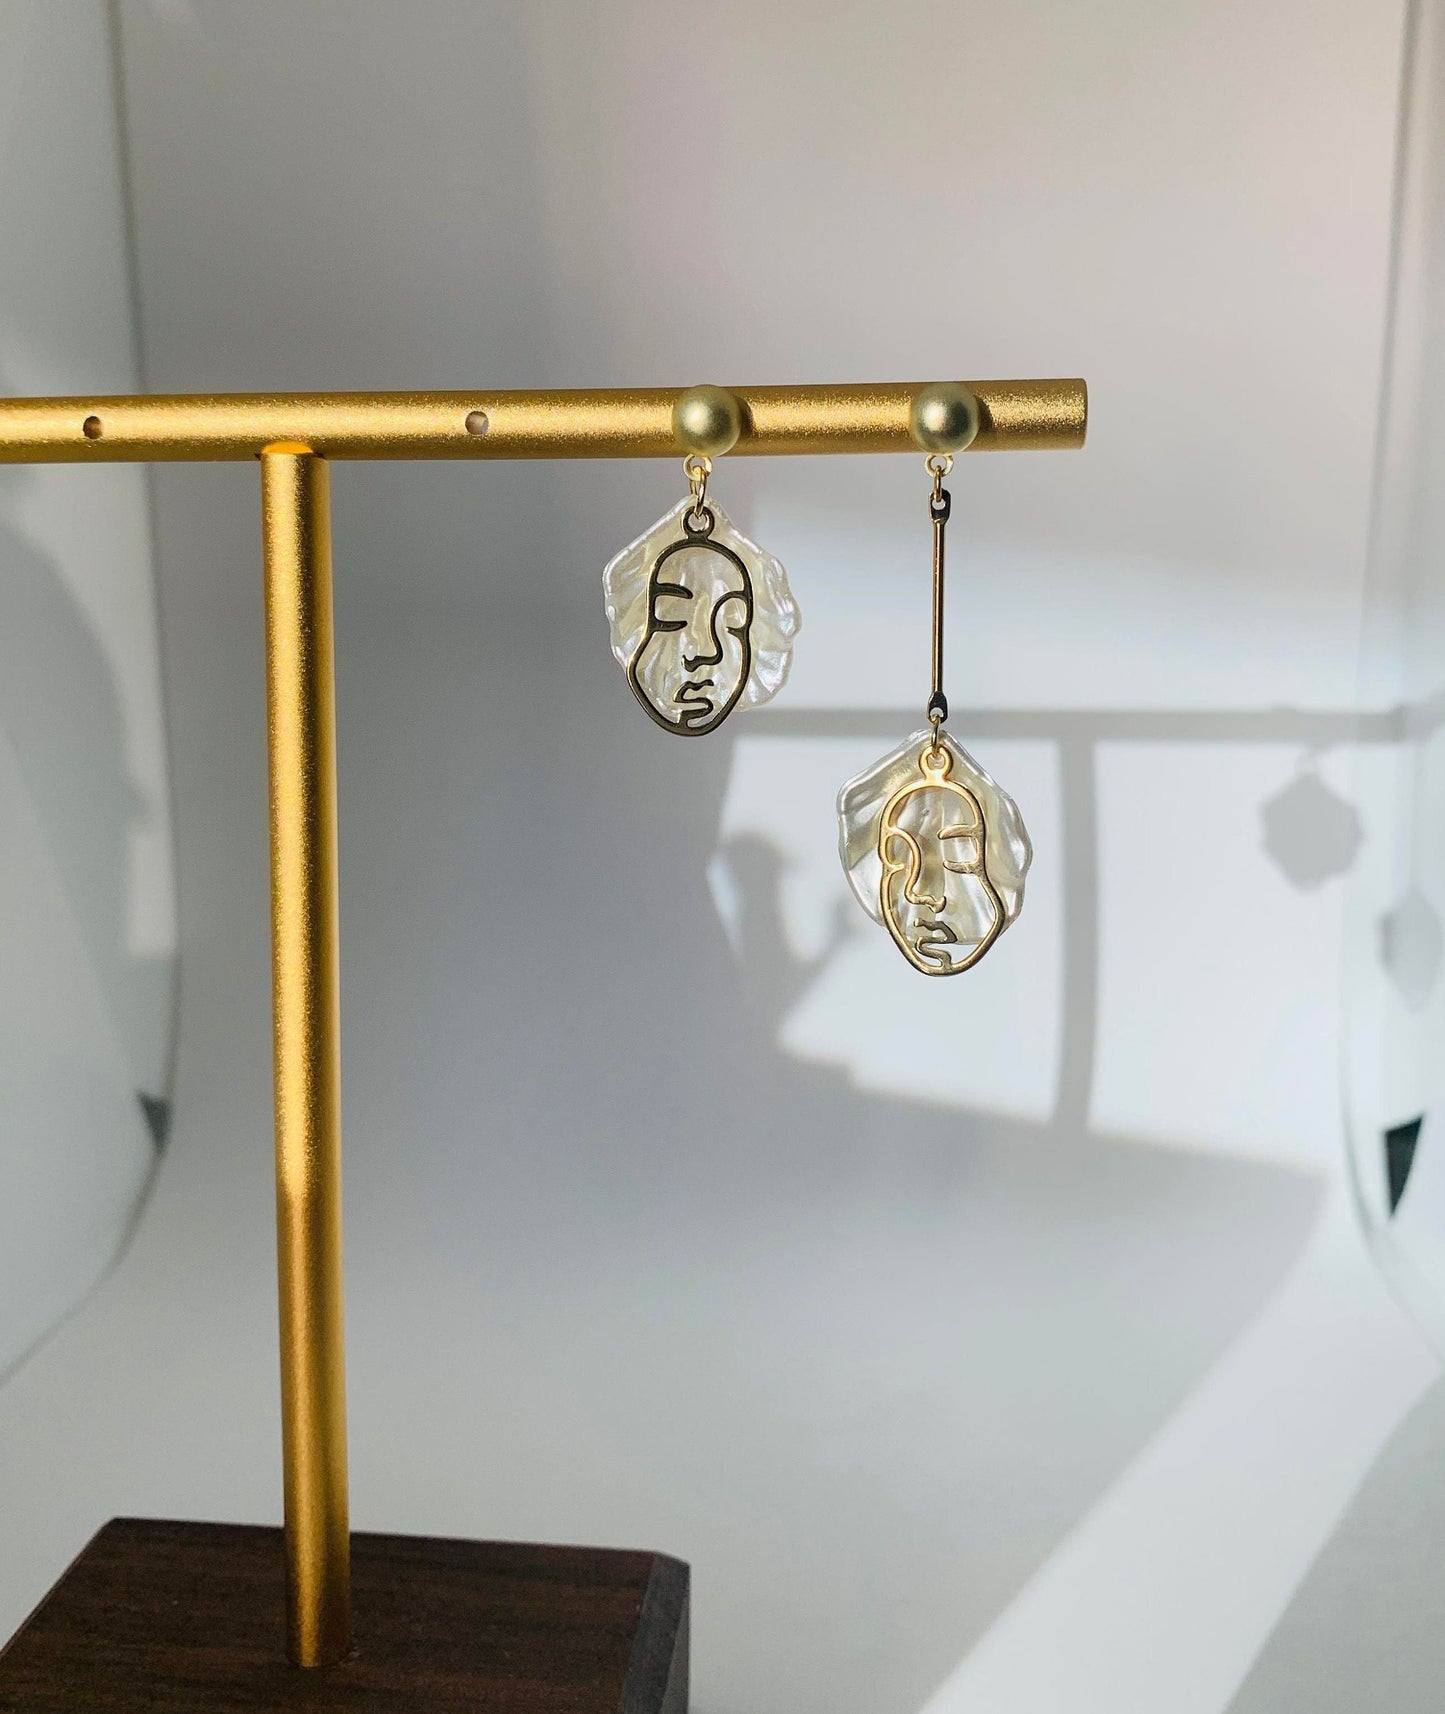 Unique Abstract Face Earrings (Lightweight)